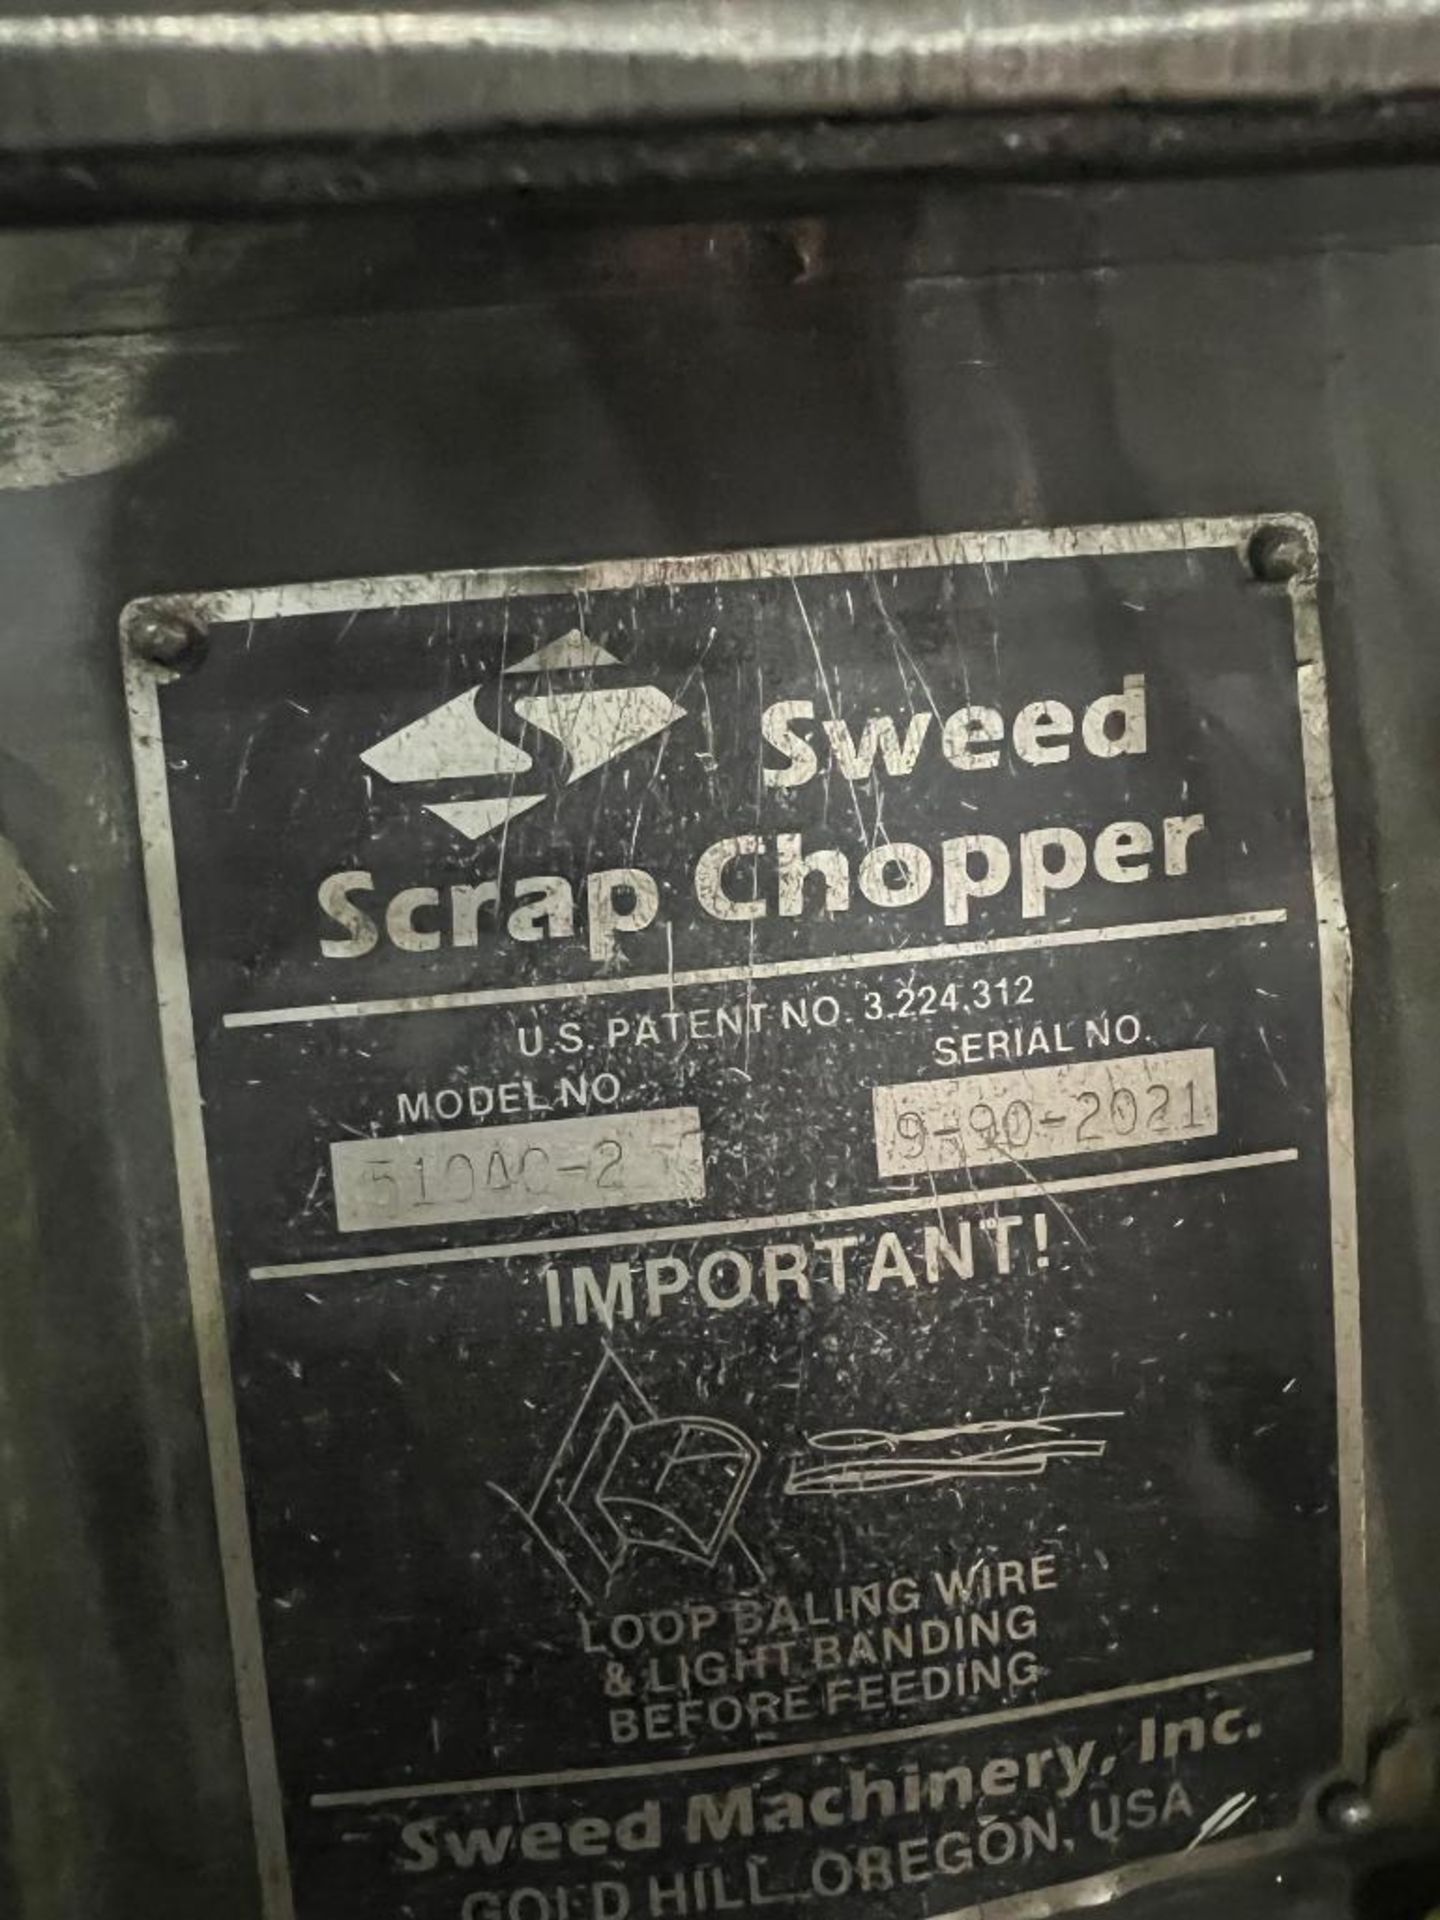 Sweed Scrap Chopper, Model 5104C-2, S/N 9-90-2021, on HD Steel Caster Stand - Image 2 of 2